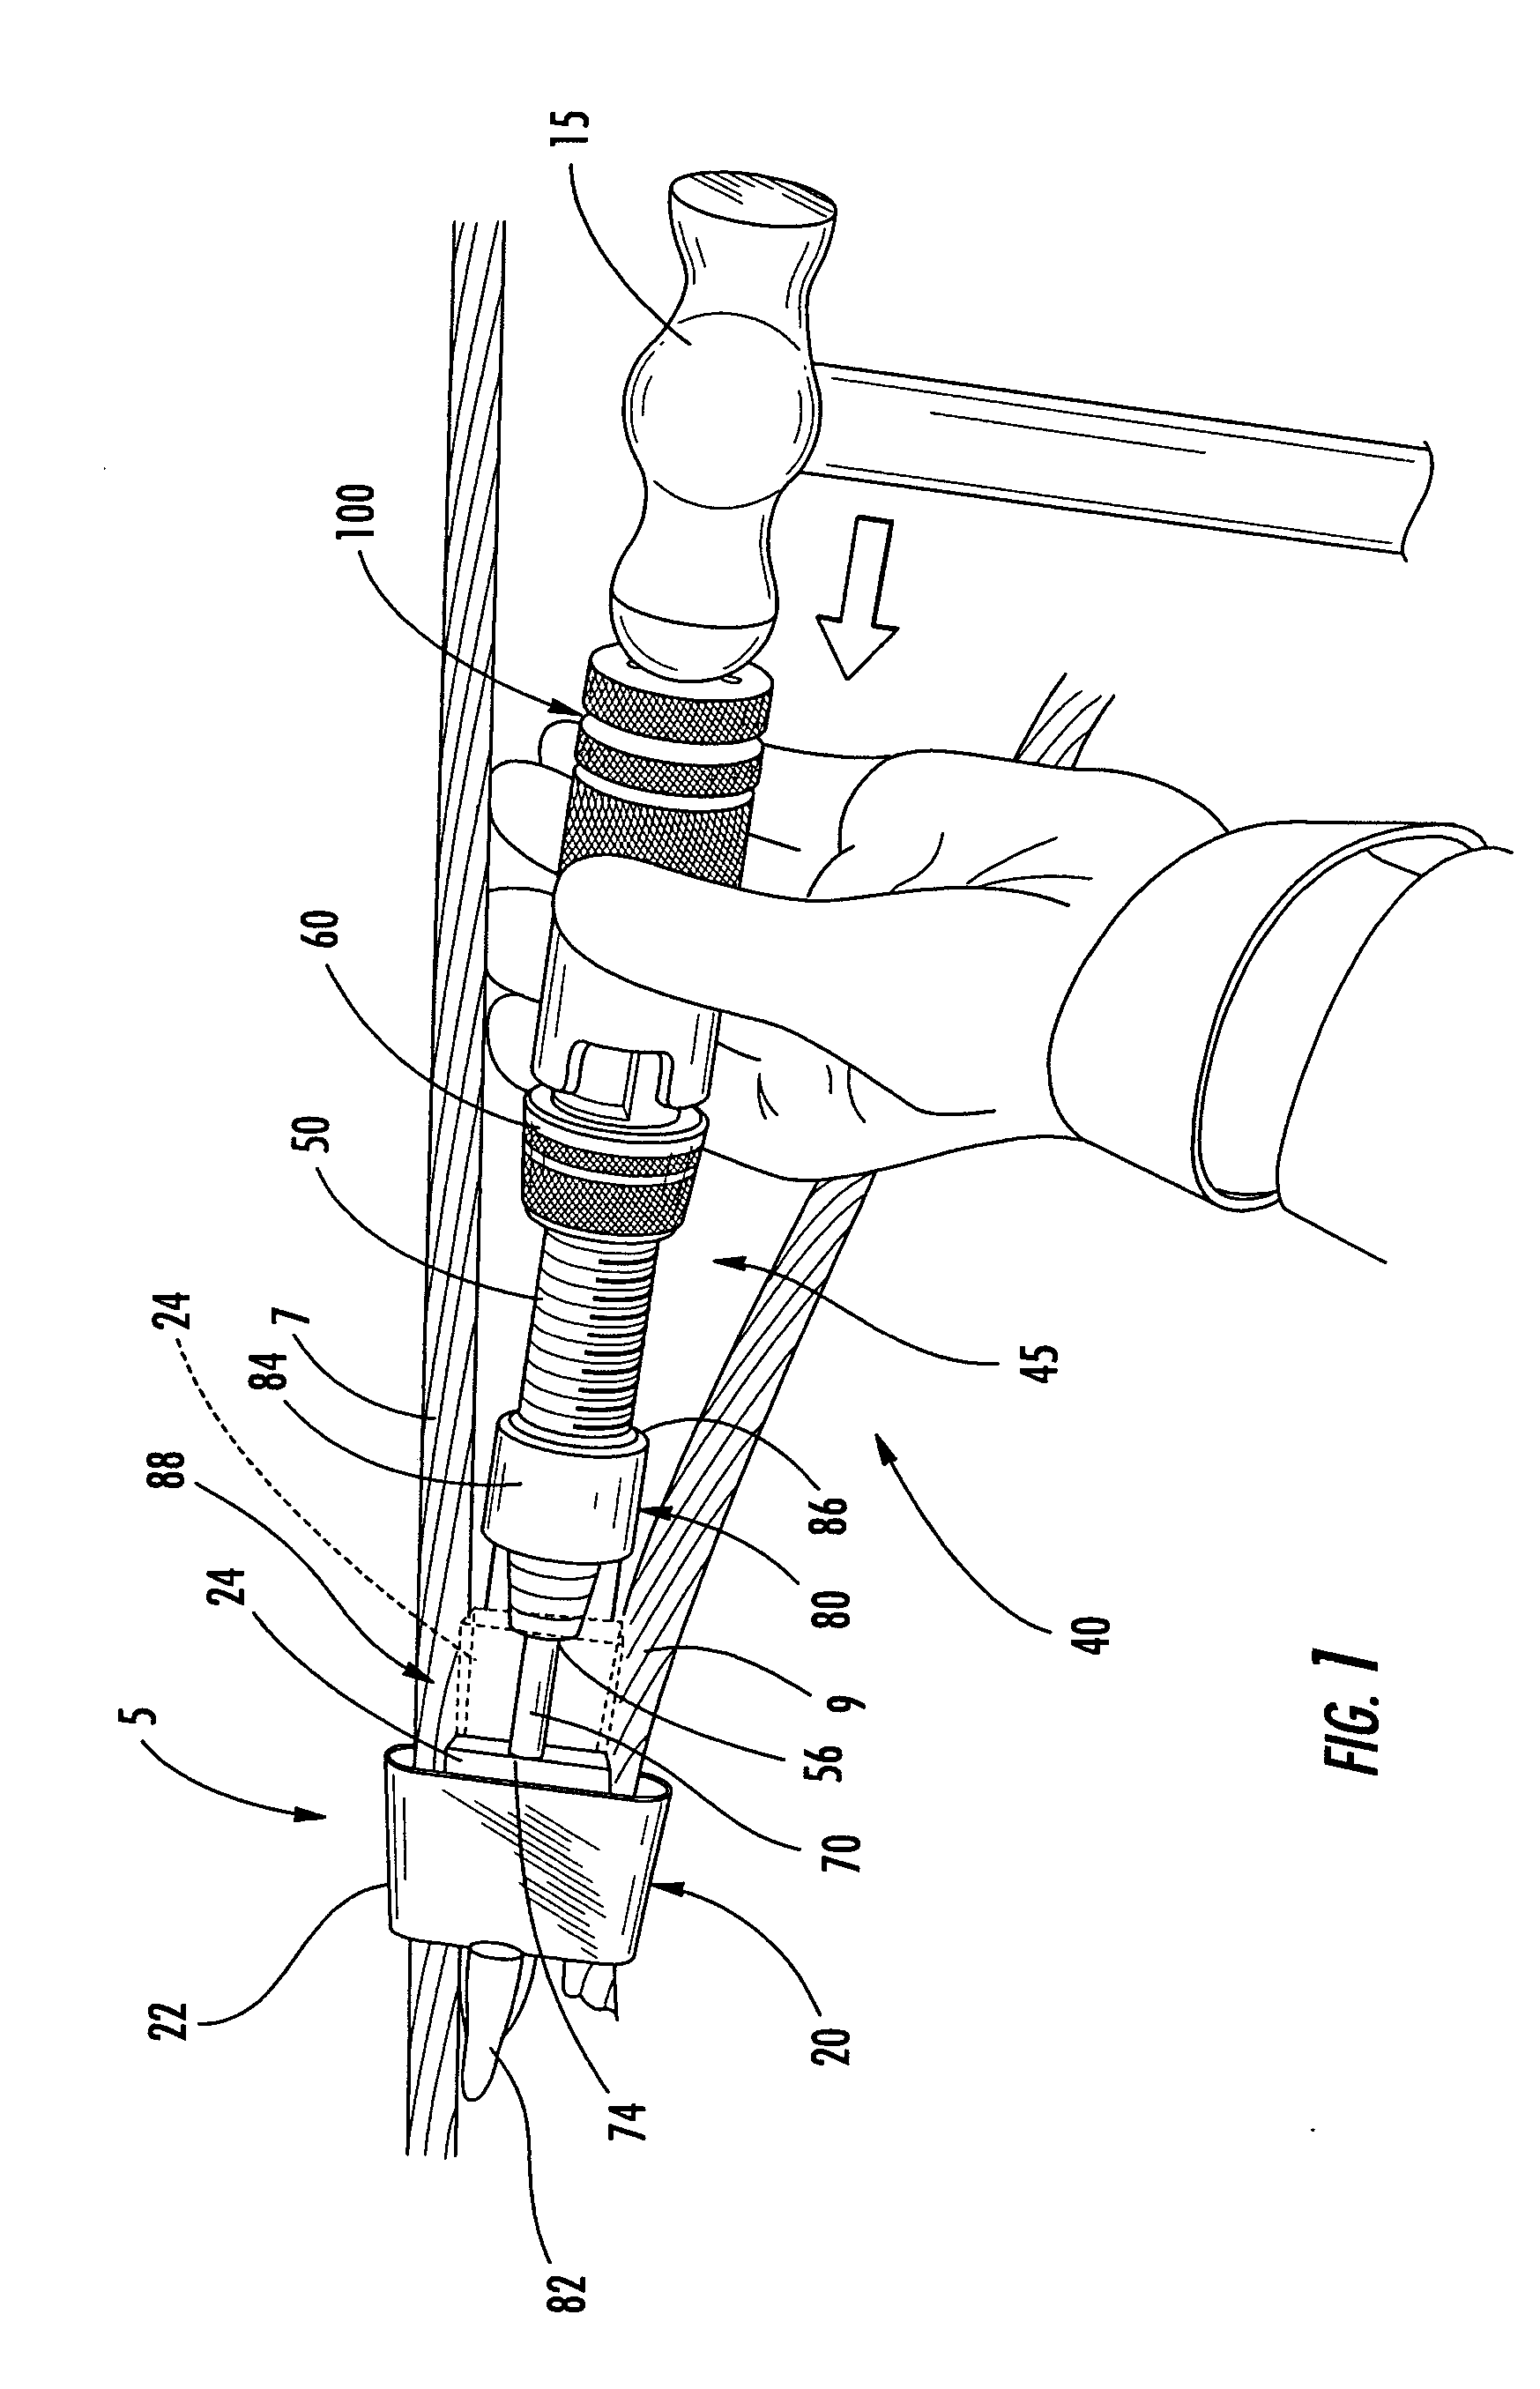 Tools for securing connectors using explosive charges and methods for using the same